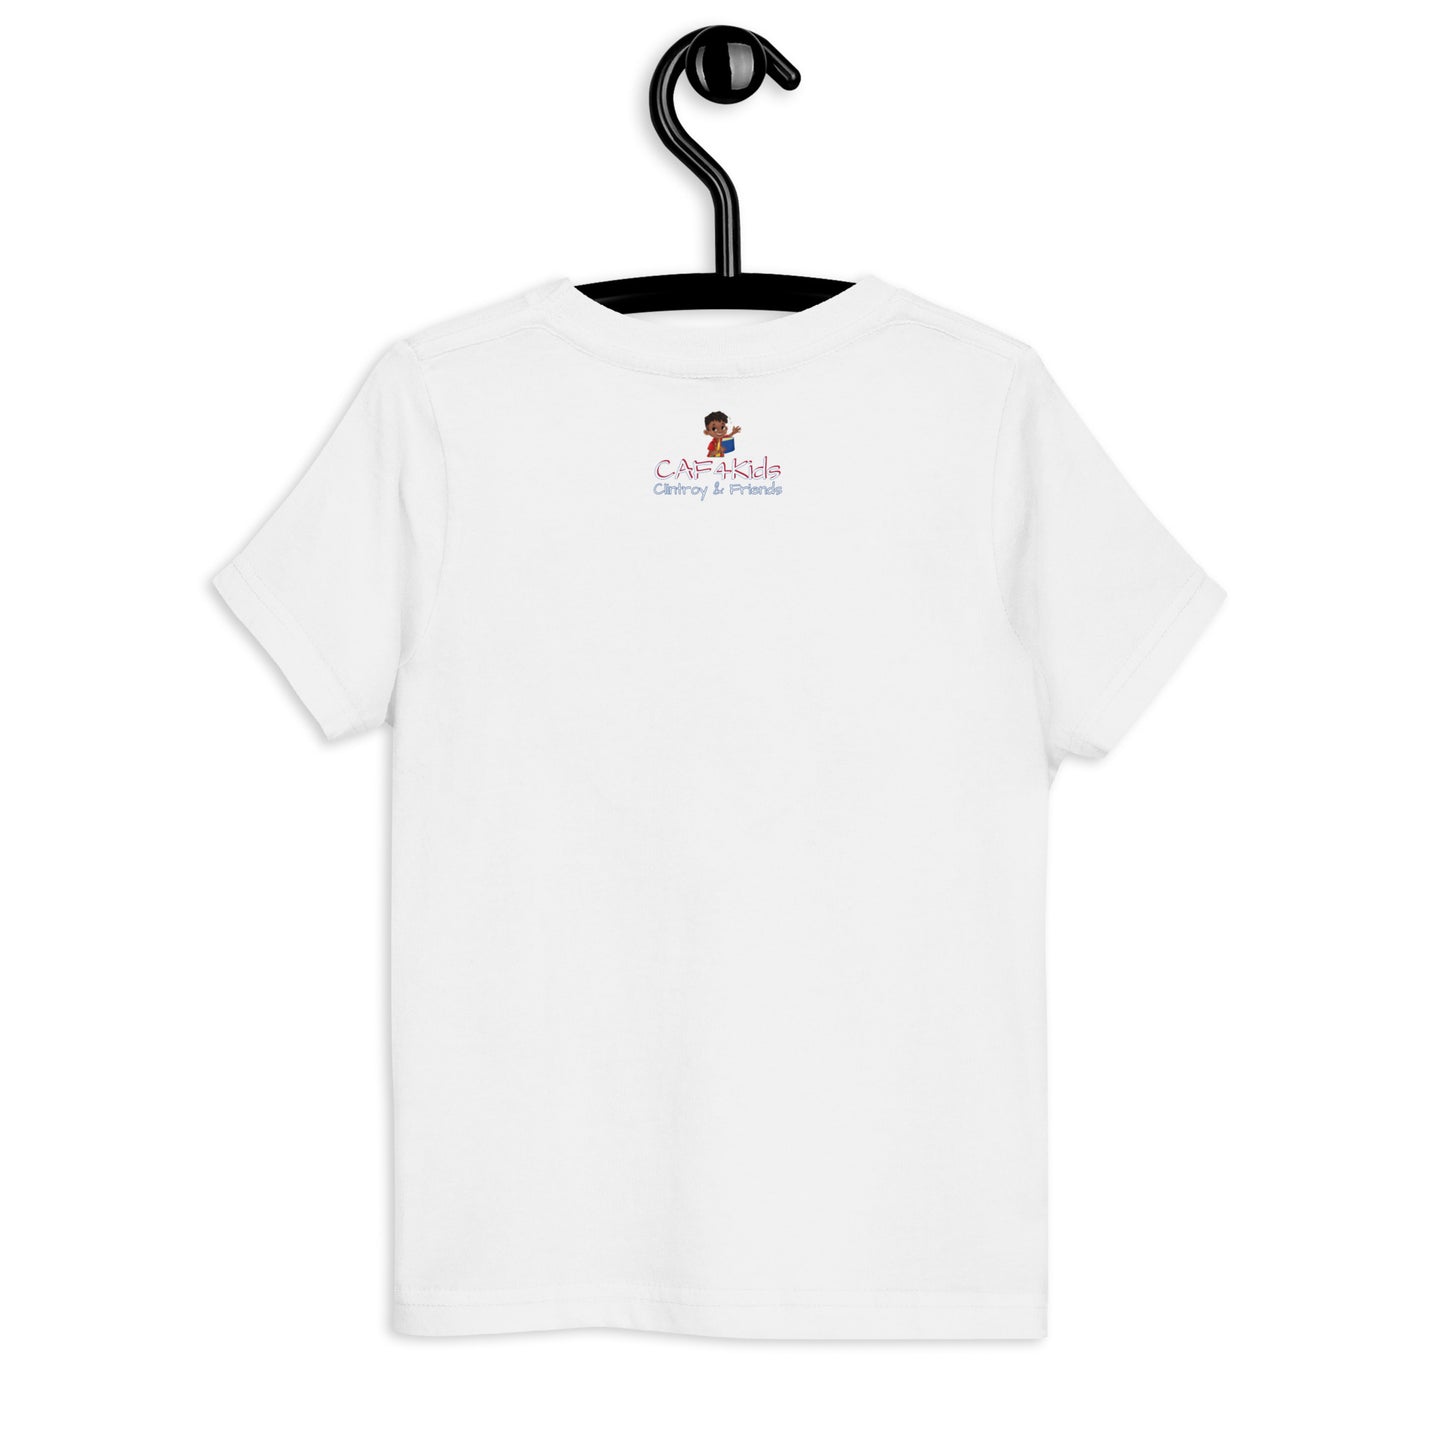 H is for Haiti Toddler T-shirt